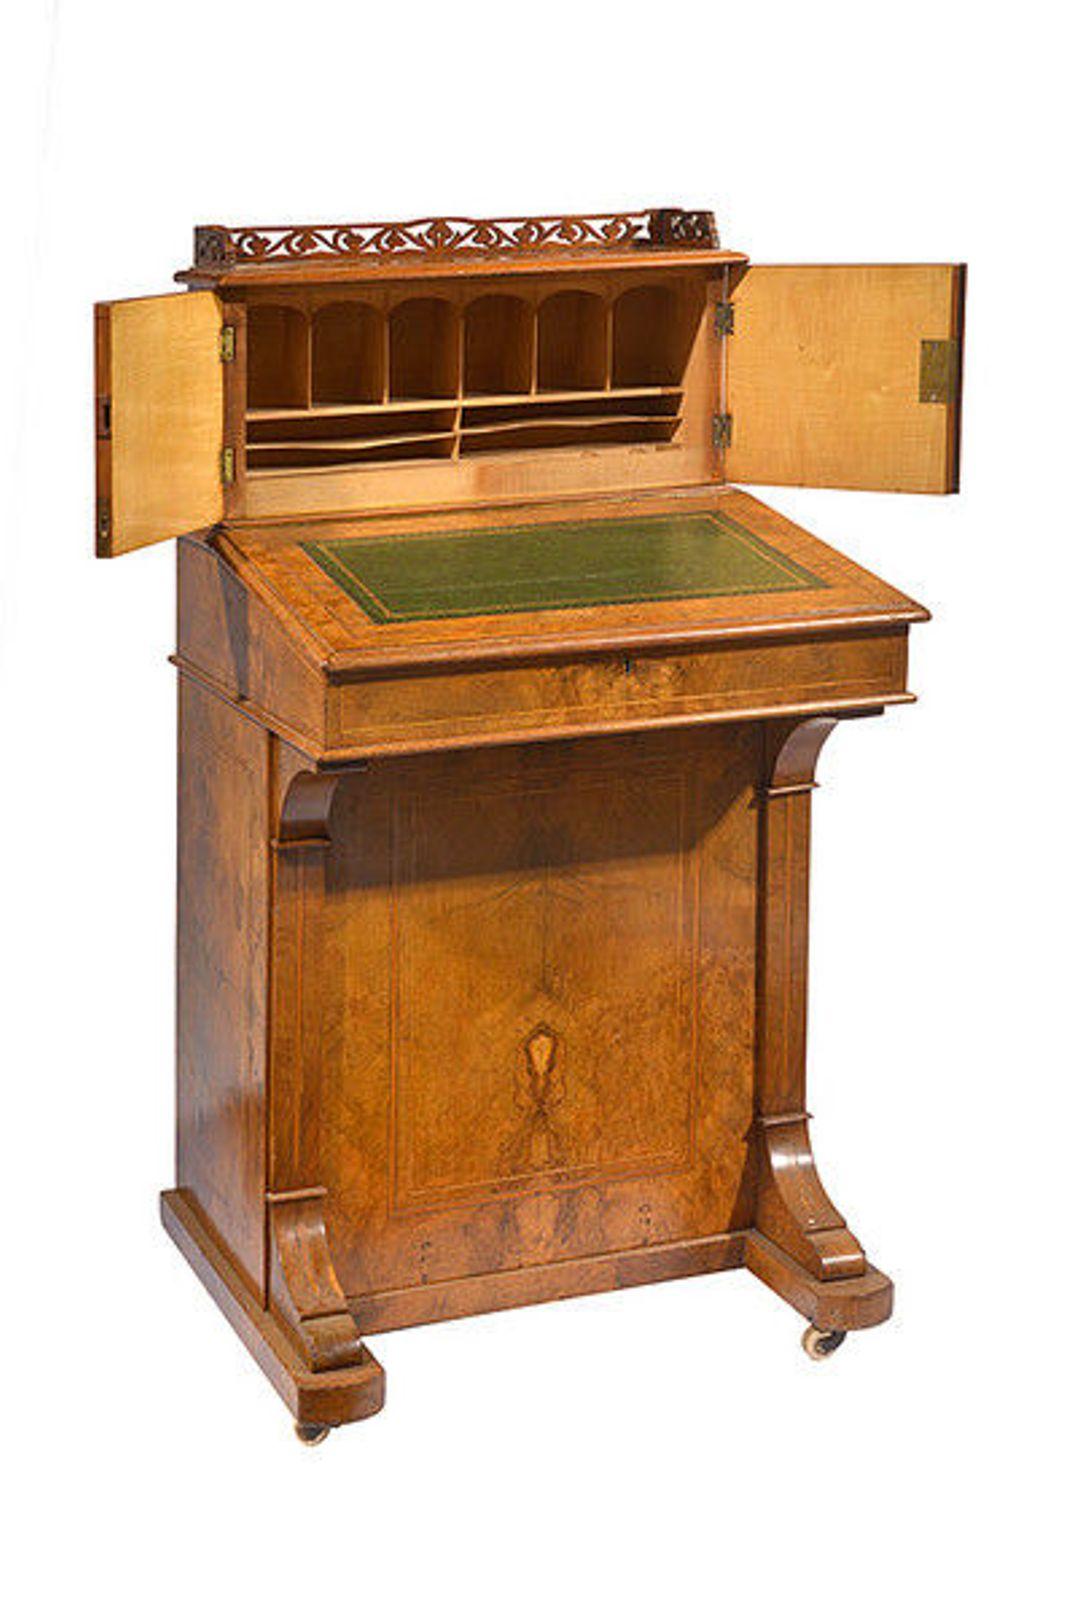 A mid-19th century figured walnut and satinwood marquetry davenport.
To the top, a pierced gallery above a pair of cabinet doors which open to reveal a maple lined interior with cubby holes an shelves
The rising slope with a green and gilt tooled